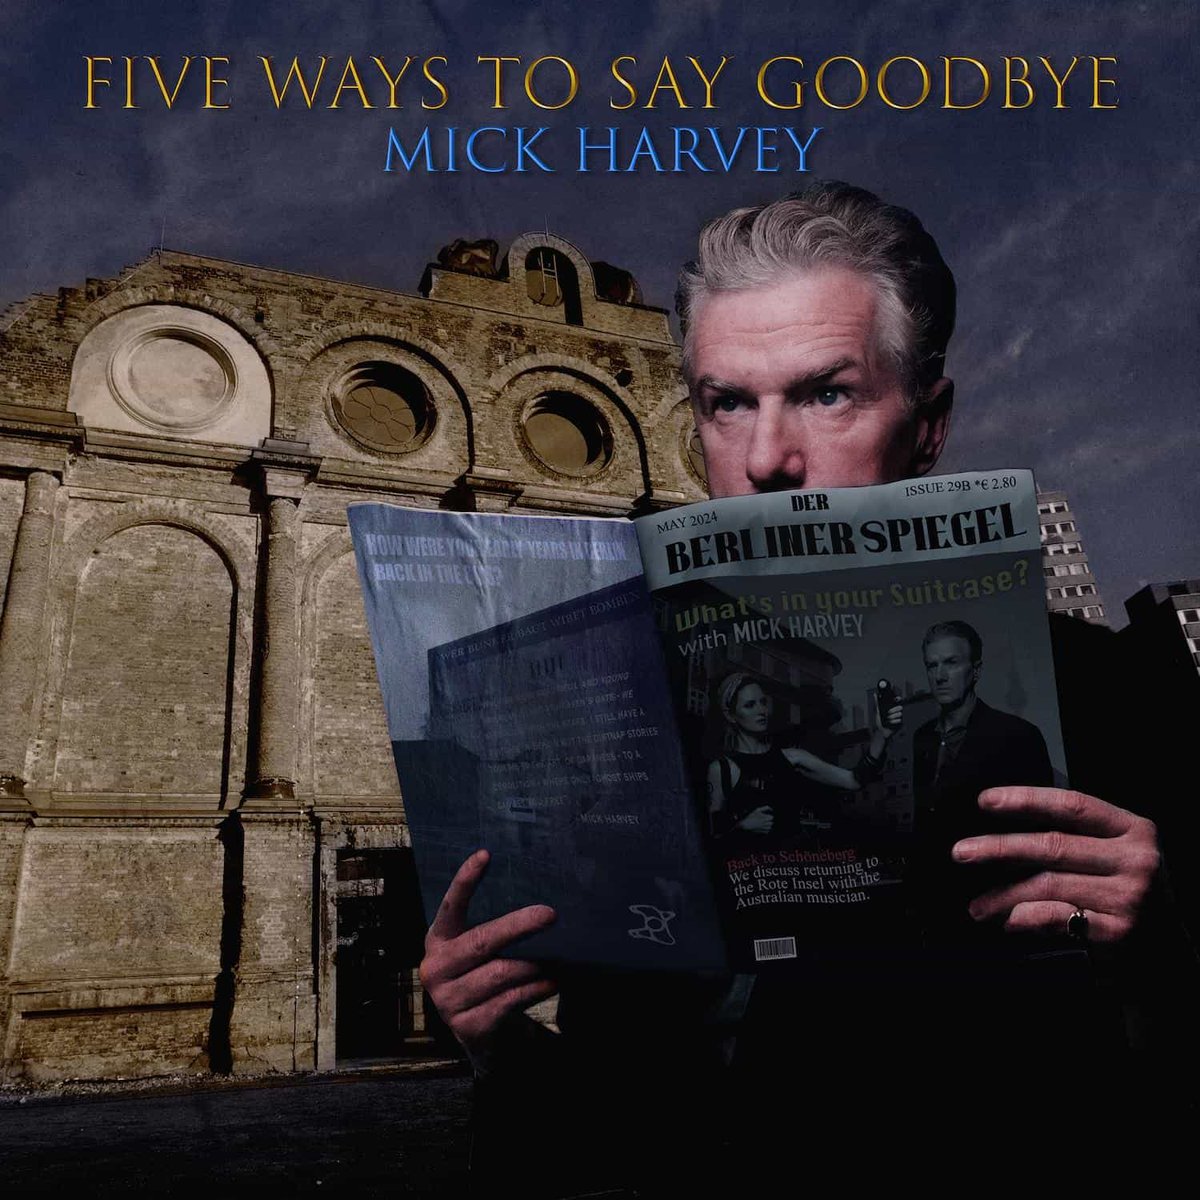 JUST IN! 'Five Ways to Say Goodbye' by Mick Harvey Bad Seed Mick Harvey mixes covers of tracks by the likes of Neil Young, The Saints, and Lee Hazlewood with originals on his latest Mute release. @MuteUK normanrecords.com/records/201801…